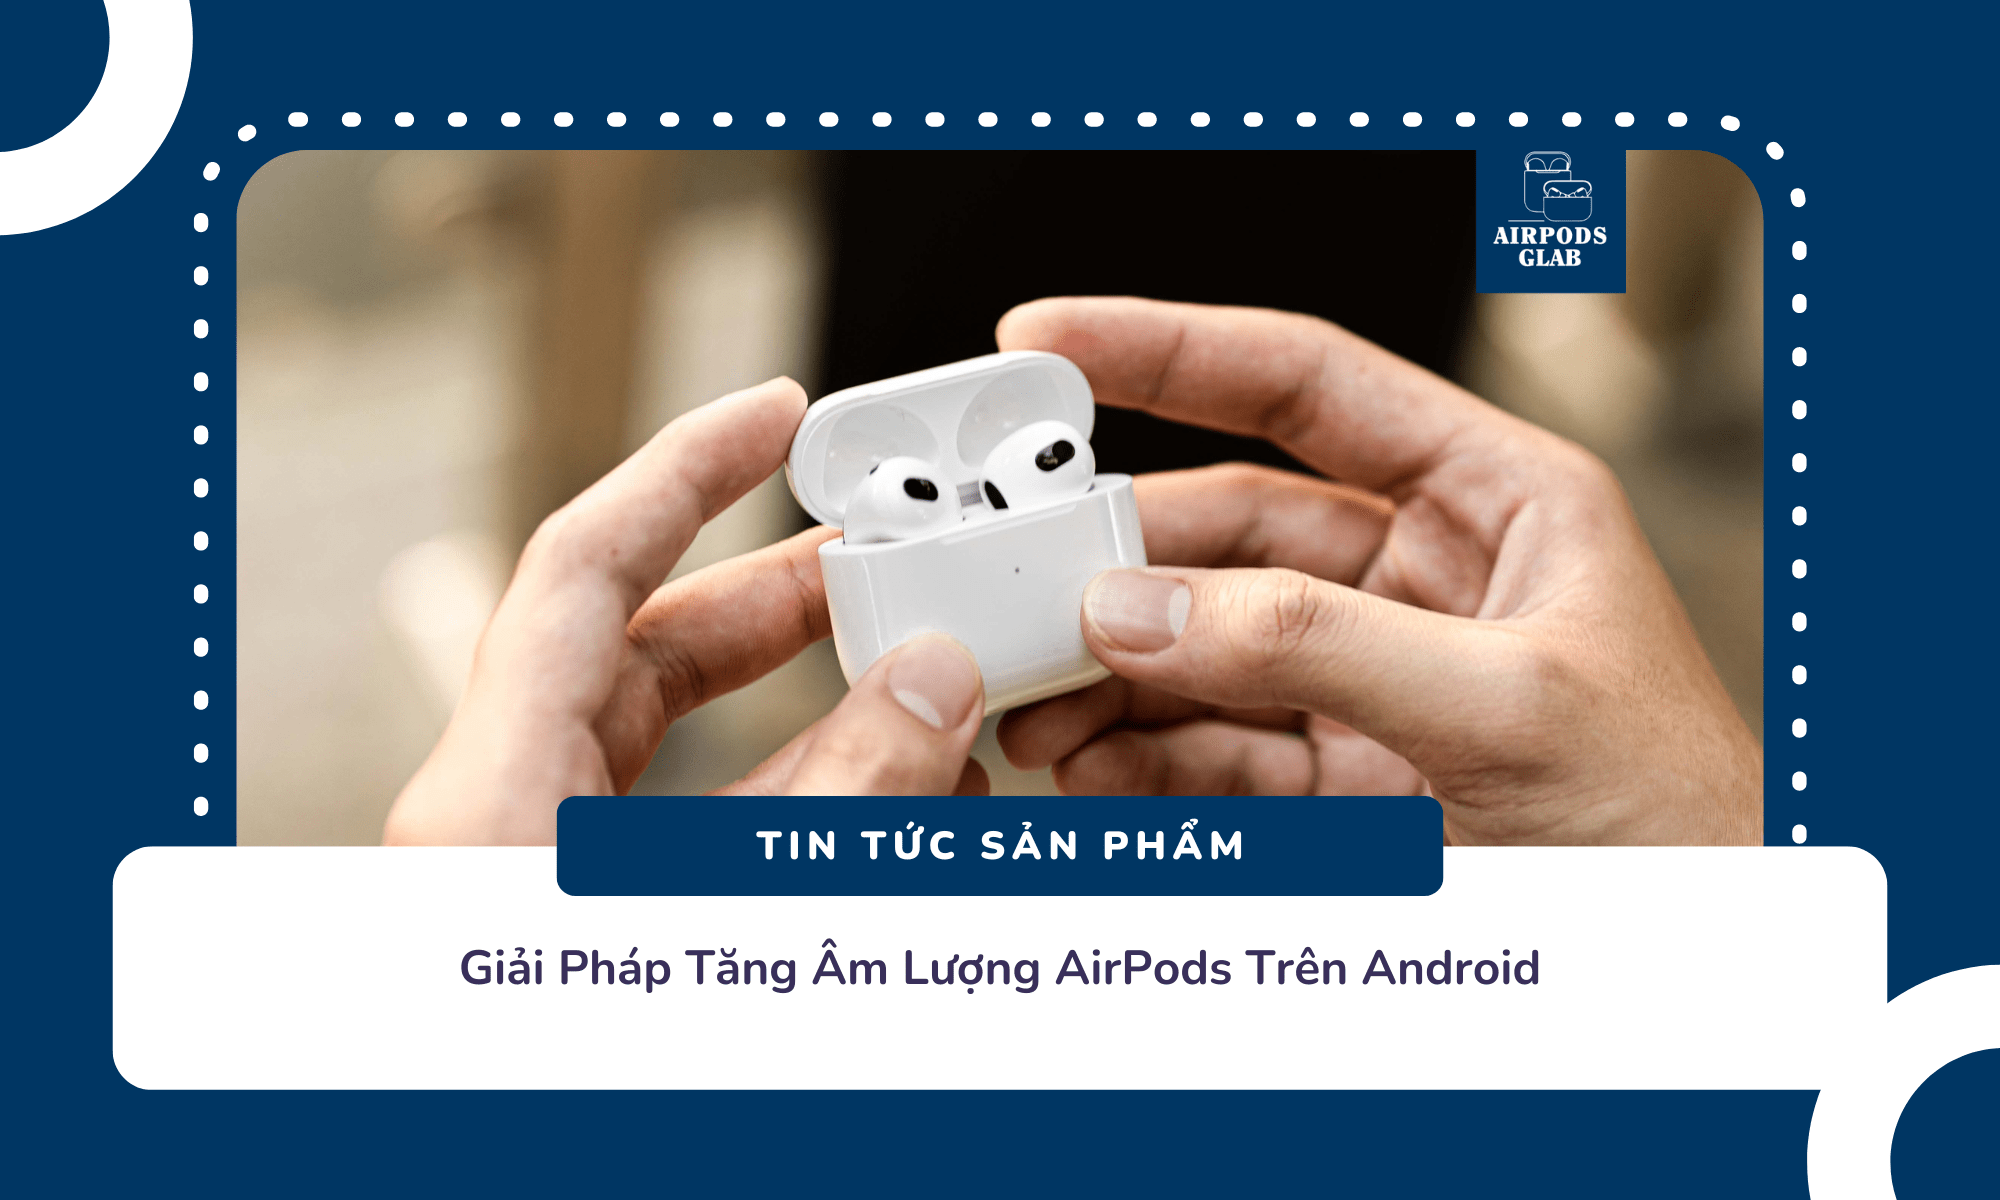 am-luong-airpods-thap-tren-android 